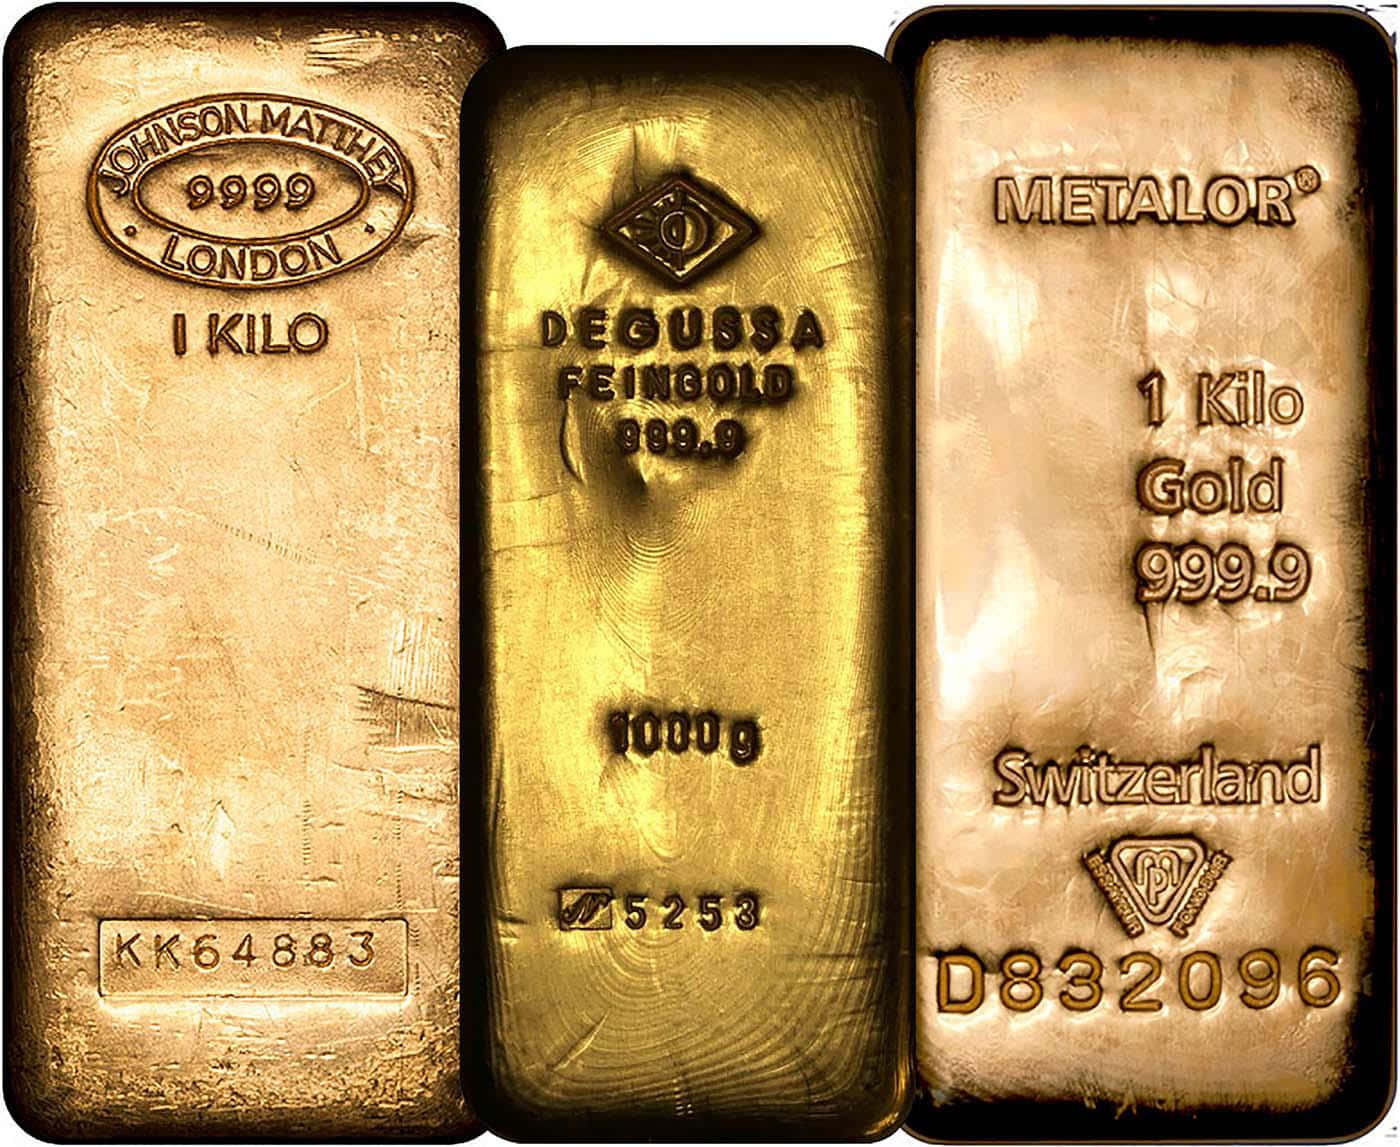 Gold Bars In Different Sizes